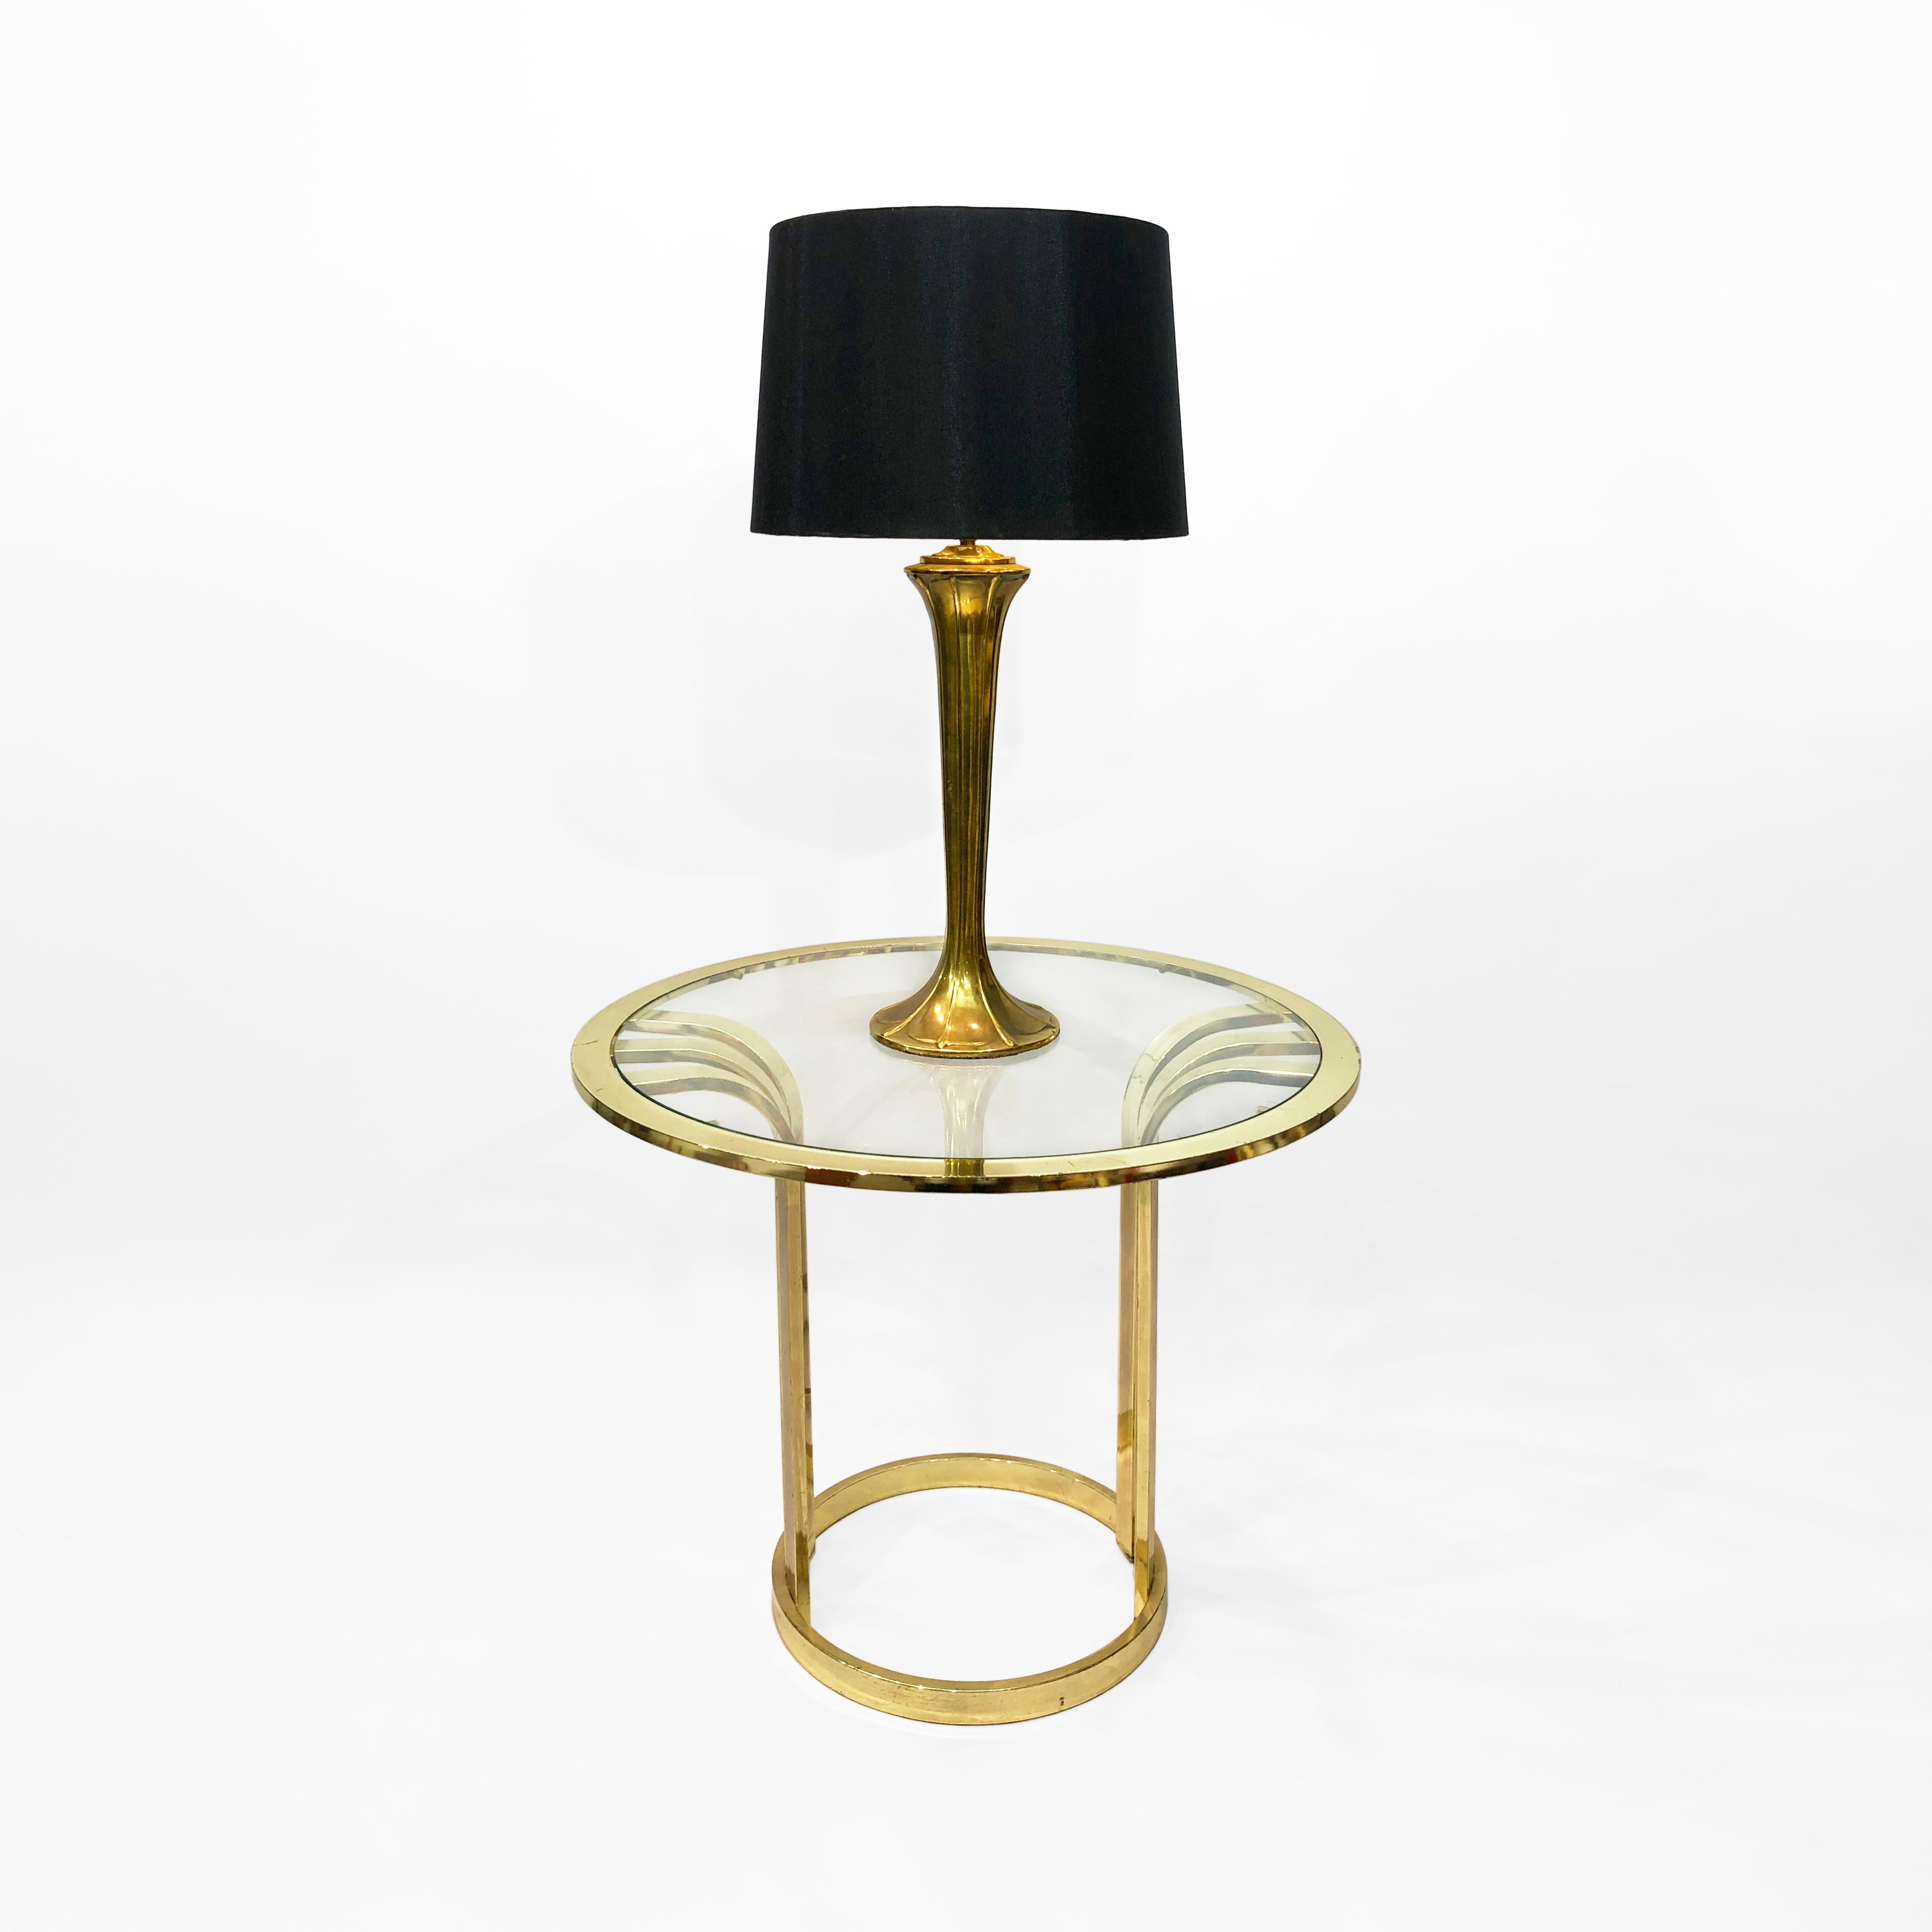 Italian Brass Plated Art Deco Style Side Table 1970s Glamour Vintage Hollywood Regency For Sale